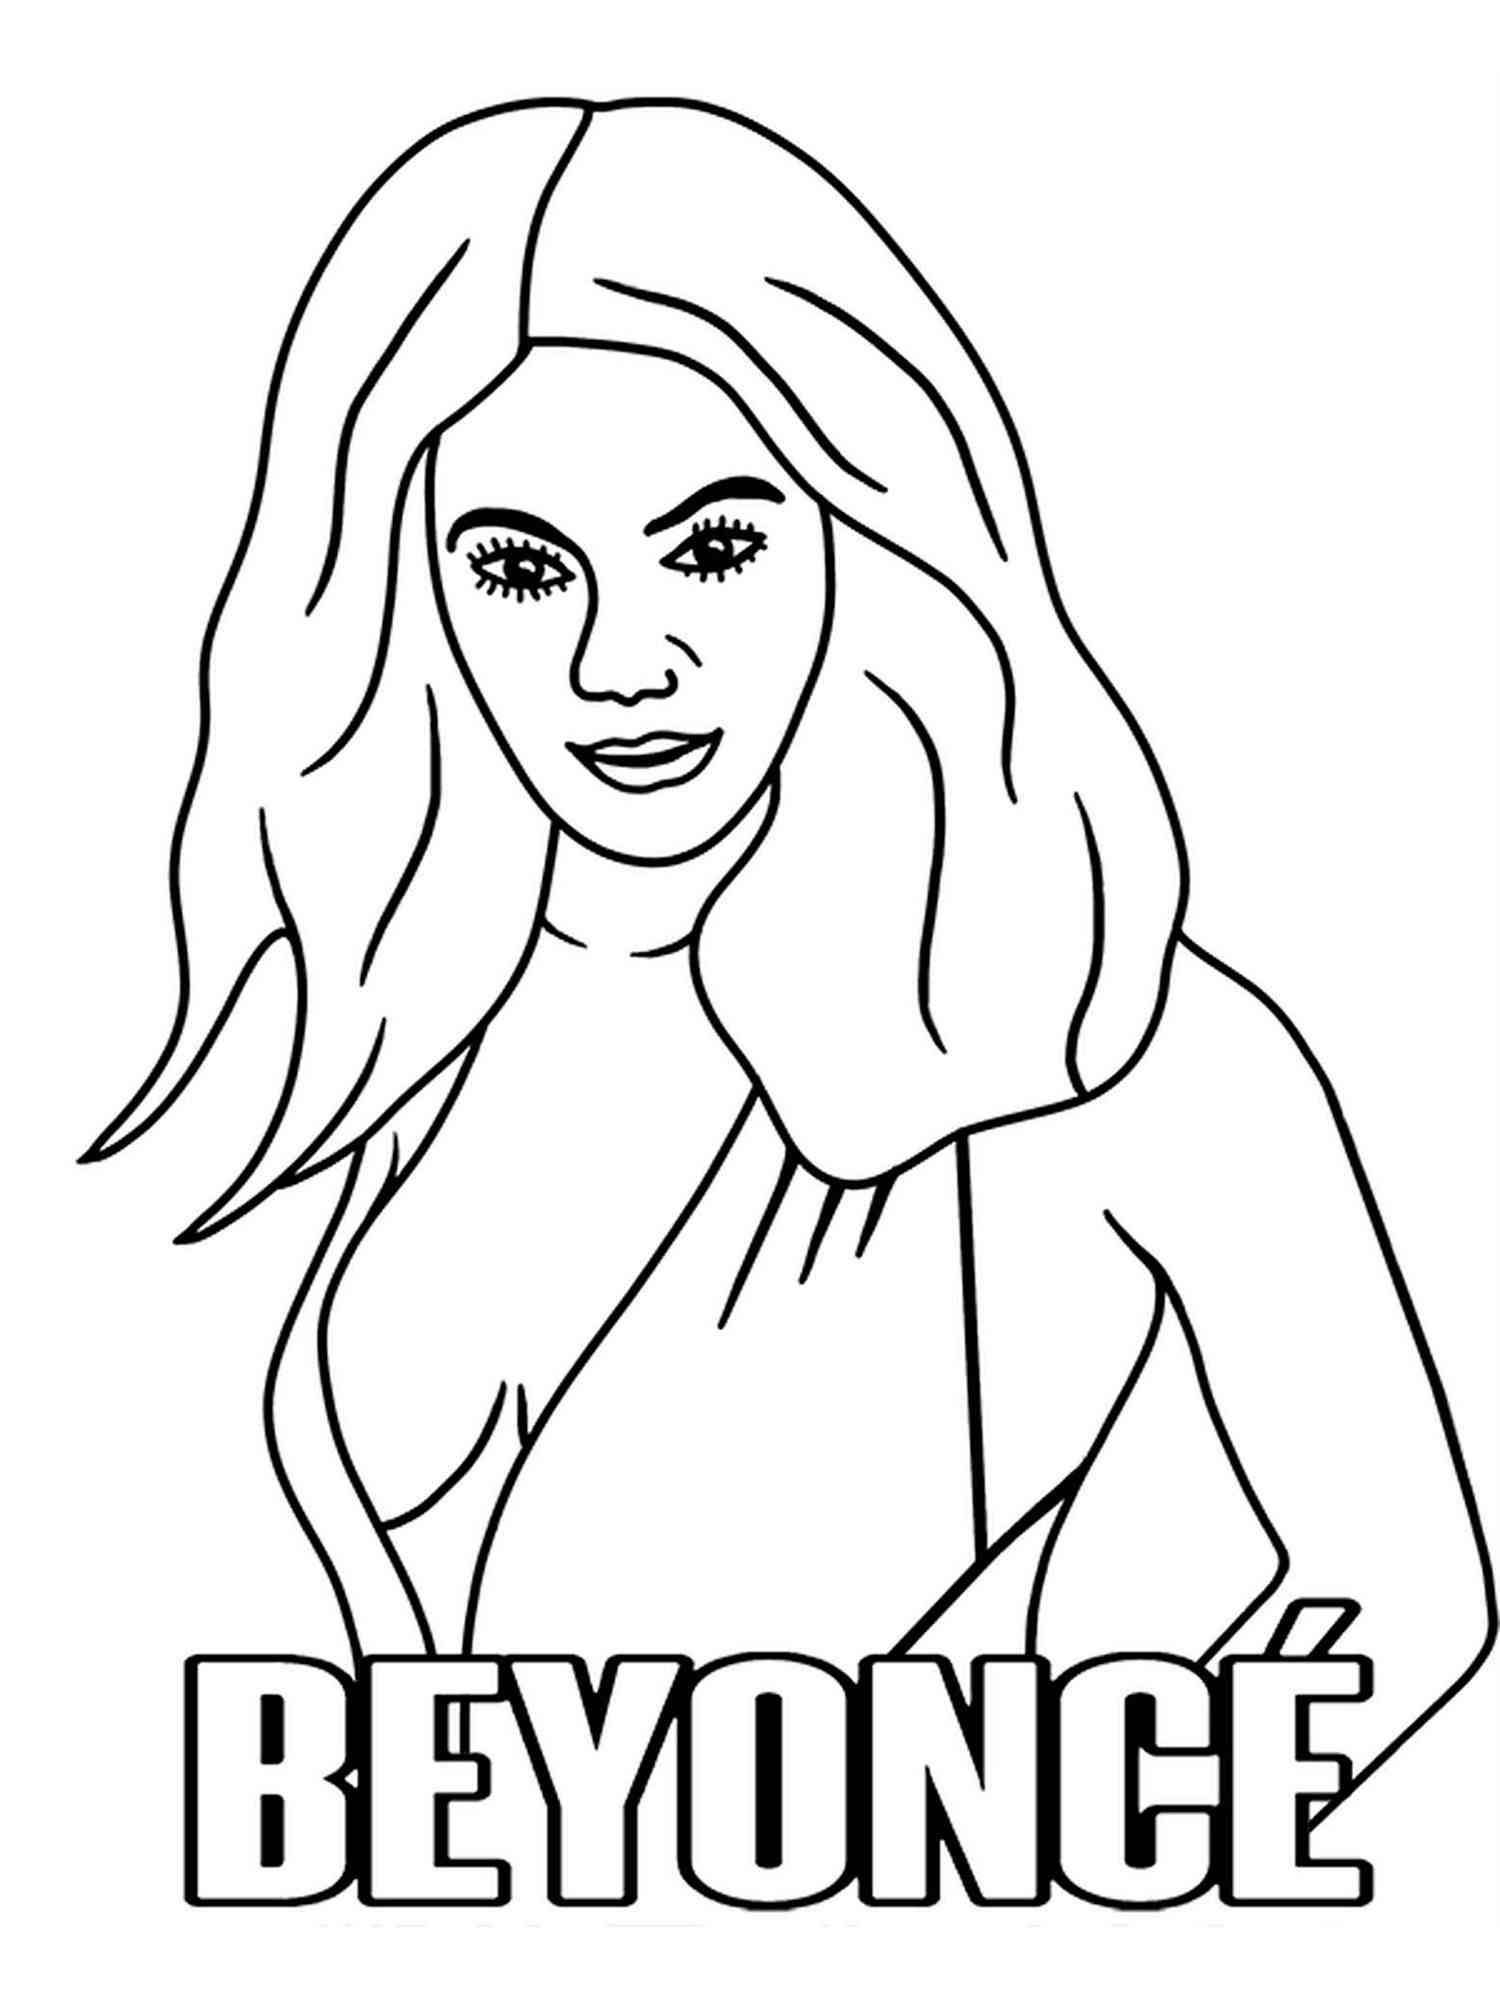 Beauty Beyonce coloring page